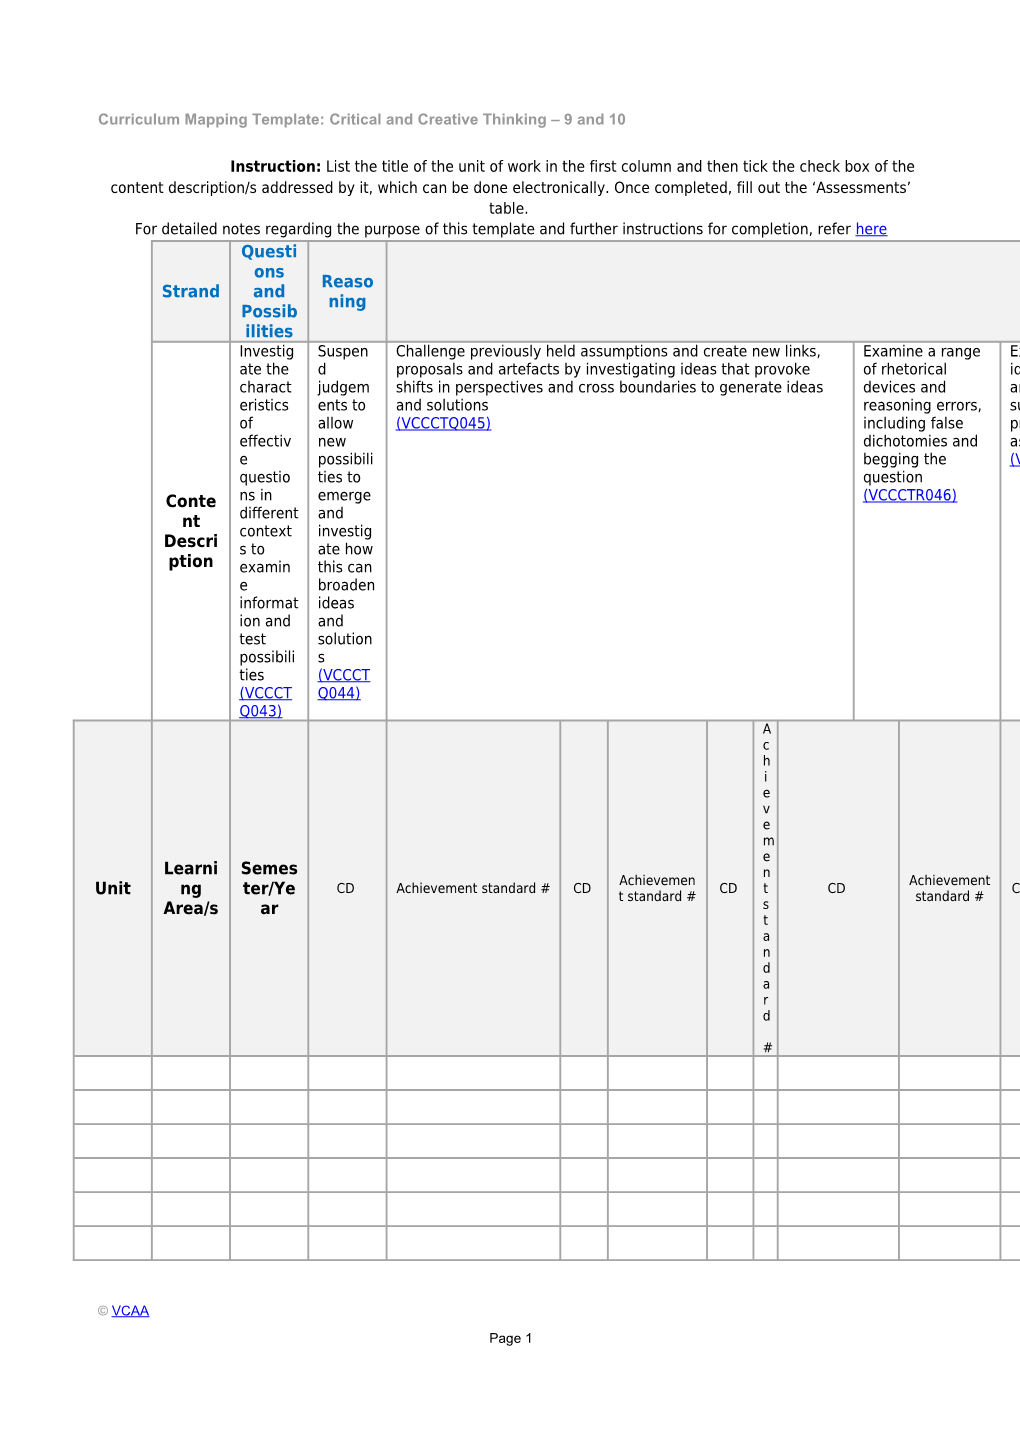 Curriculum Mapping Template: Critical and Creative Thinking 9 and 10